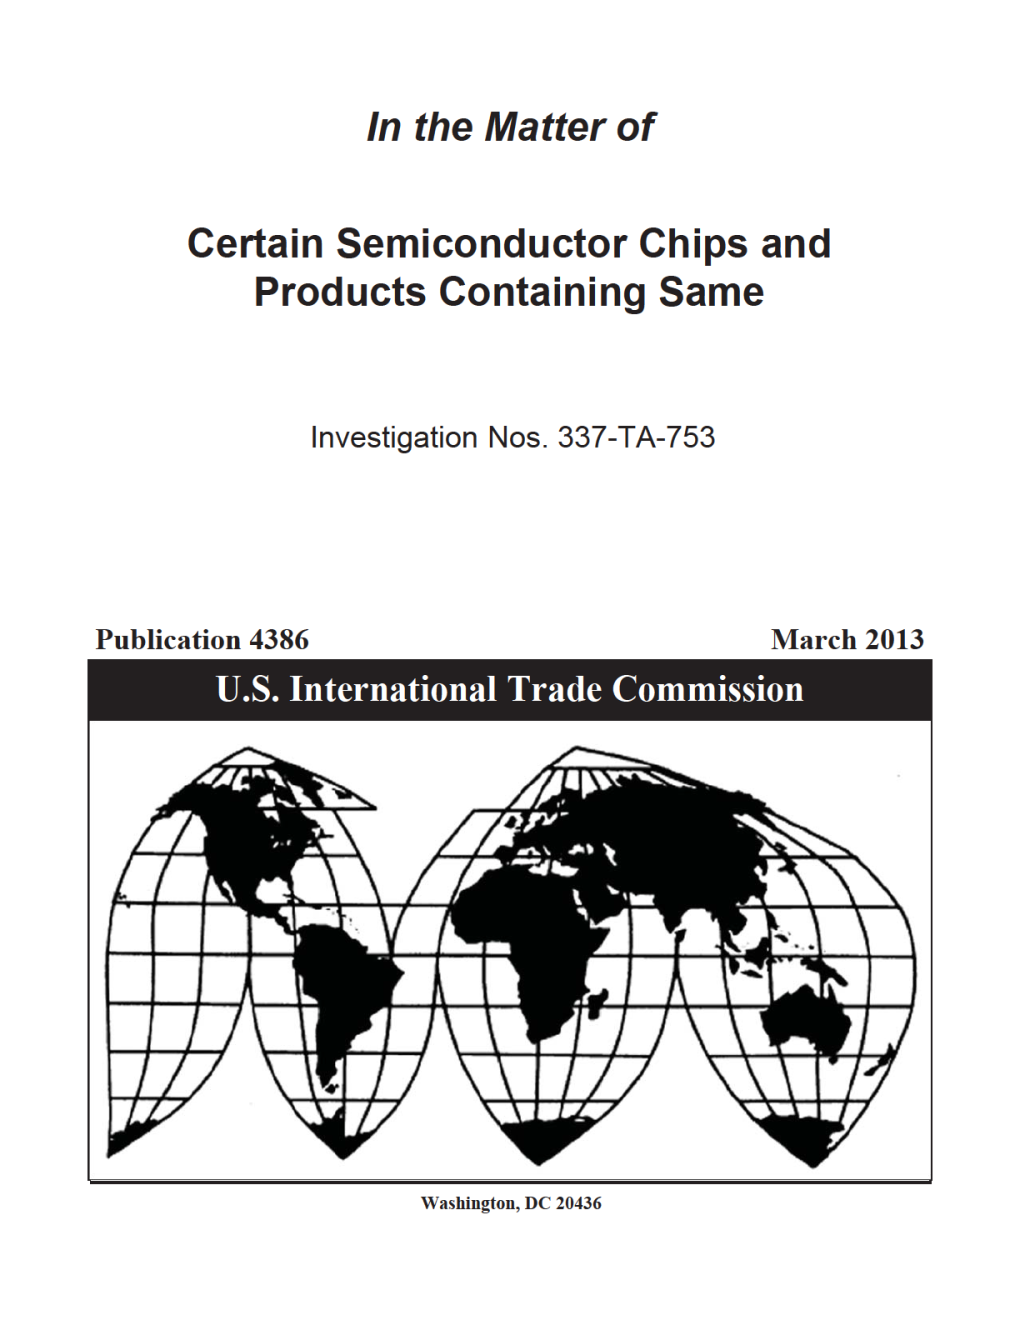 Certain Semiconductor Chips and Products Containing Same